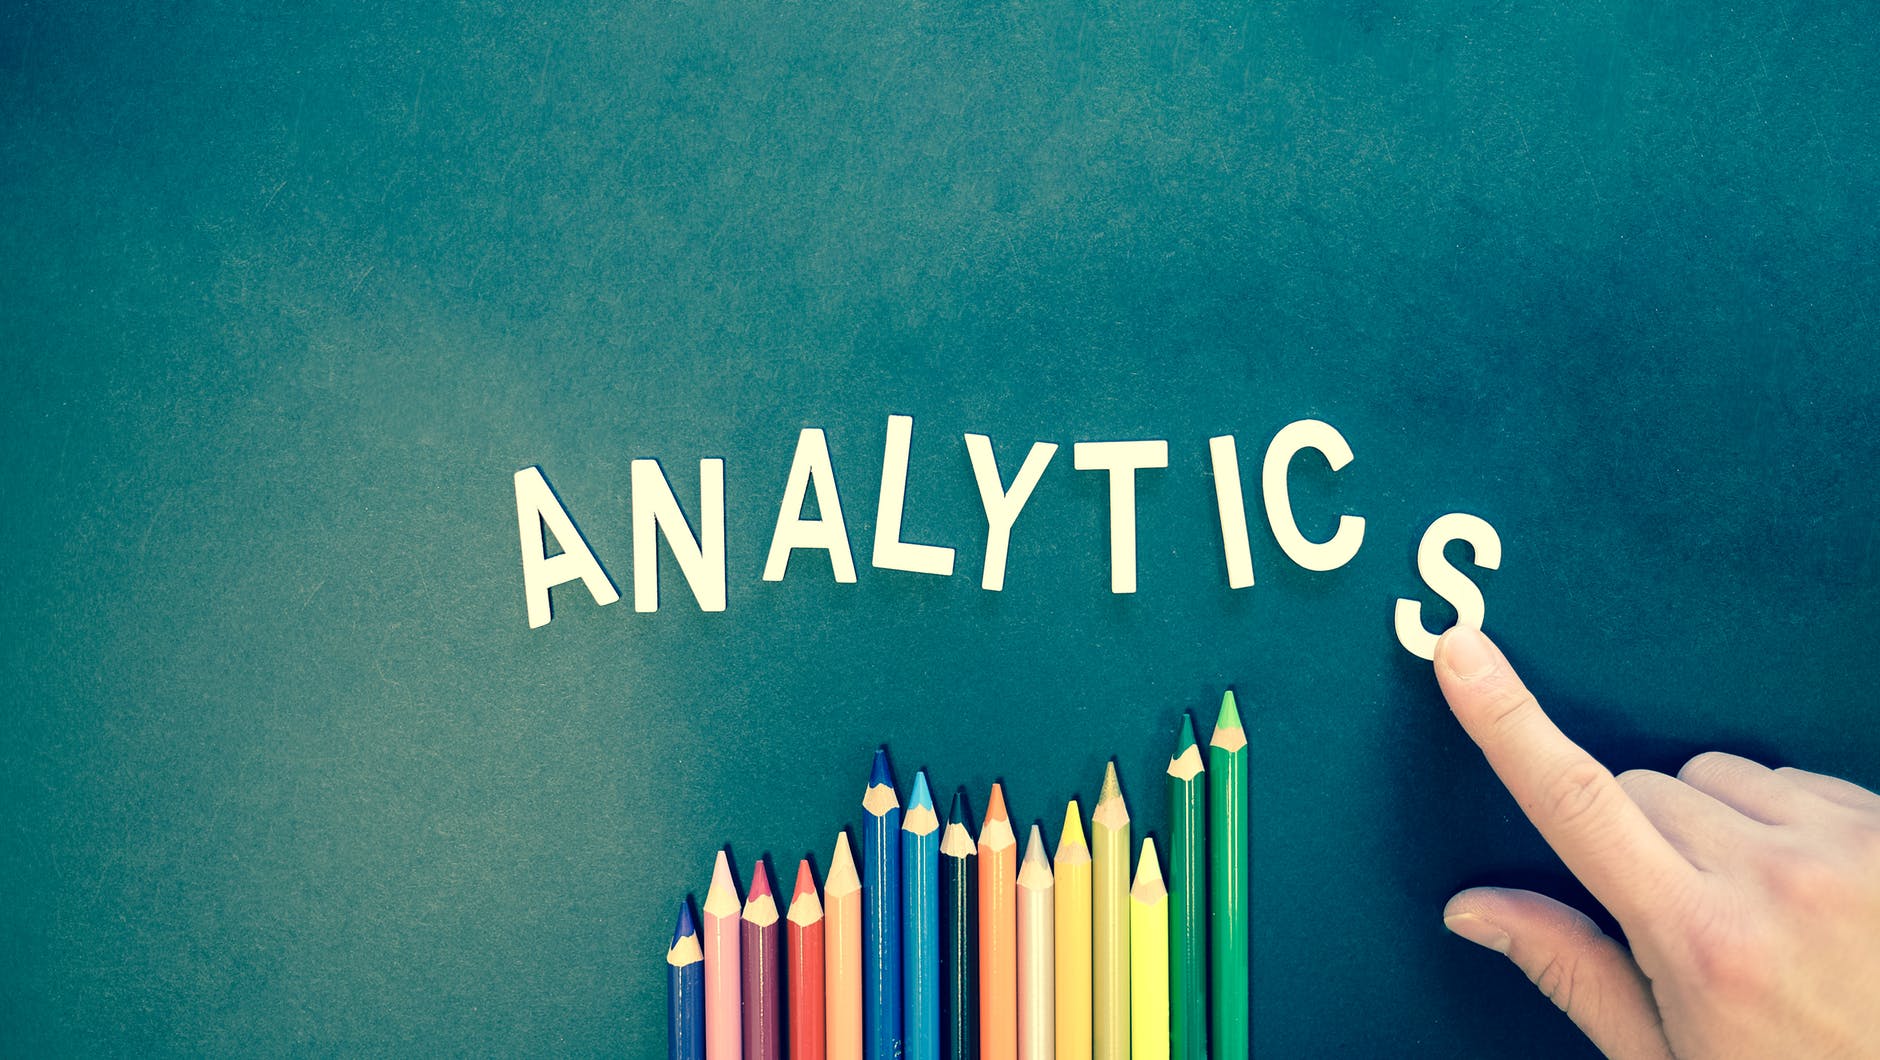 The word analytics and some colored pencils